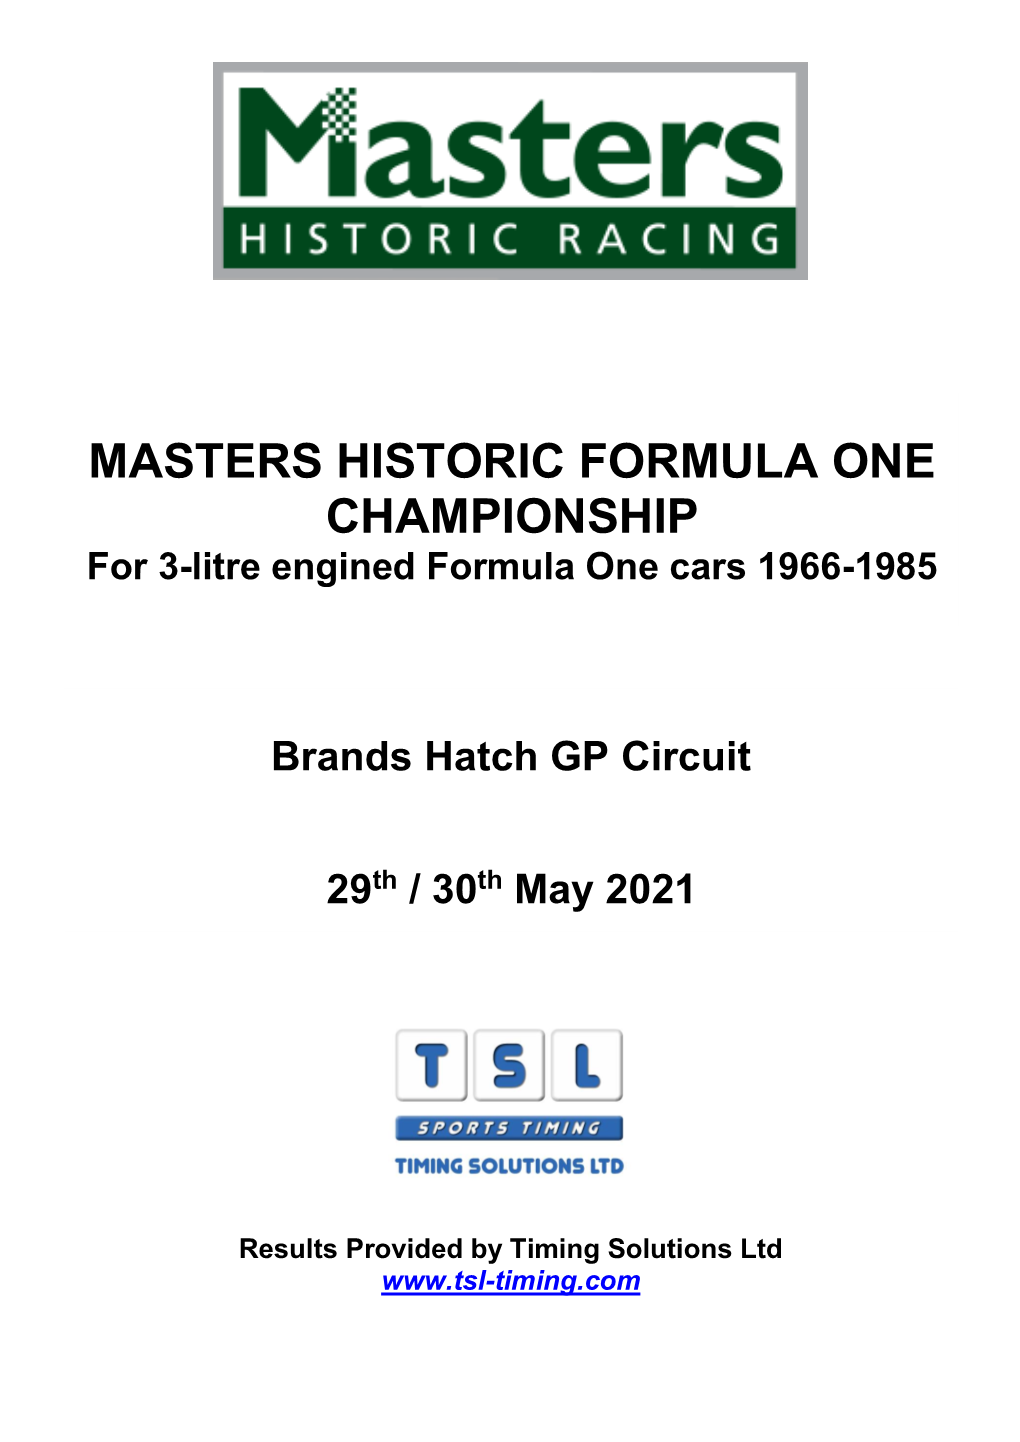 MASTERS HISTORIC FORMULA ONE CHAMPIONSHIP for 3-Litre Engined Formula One Cars 1966-1985